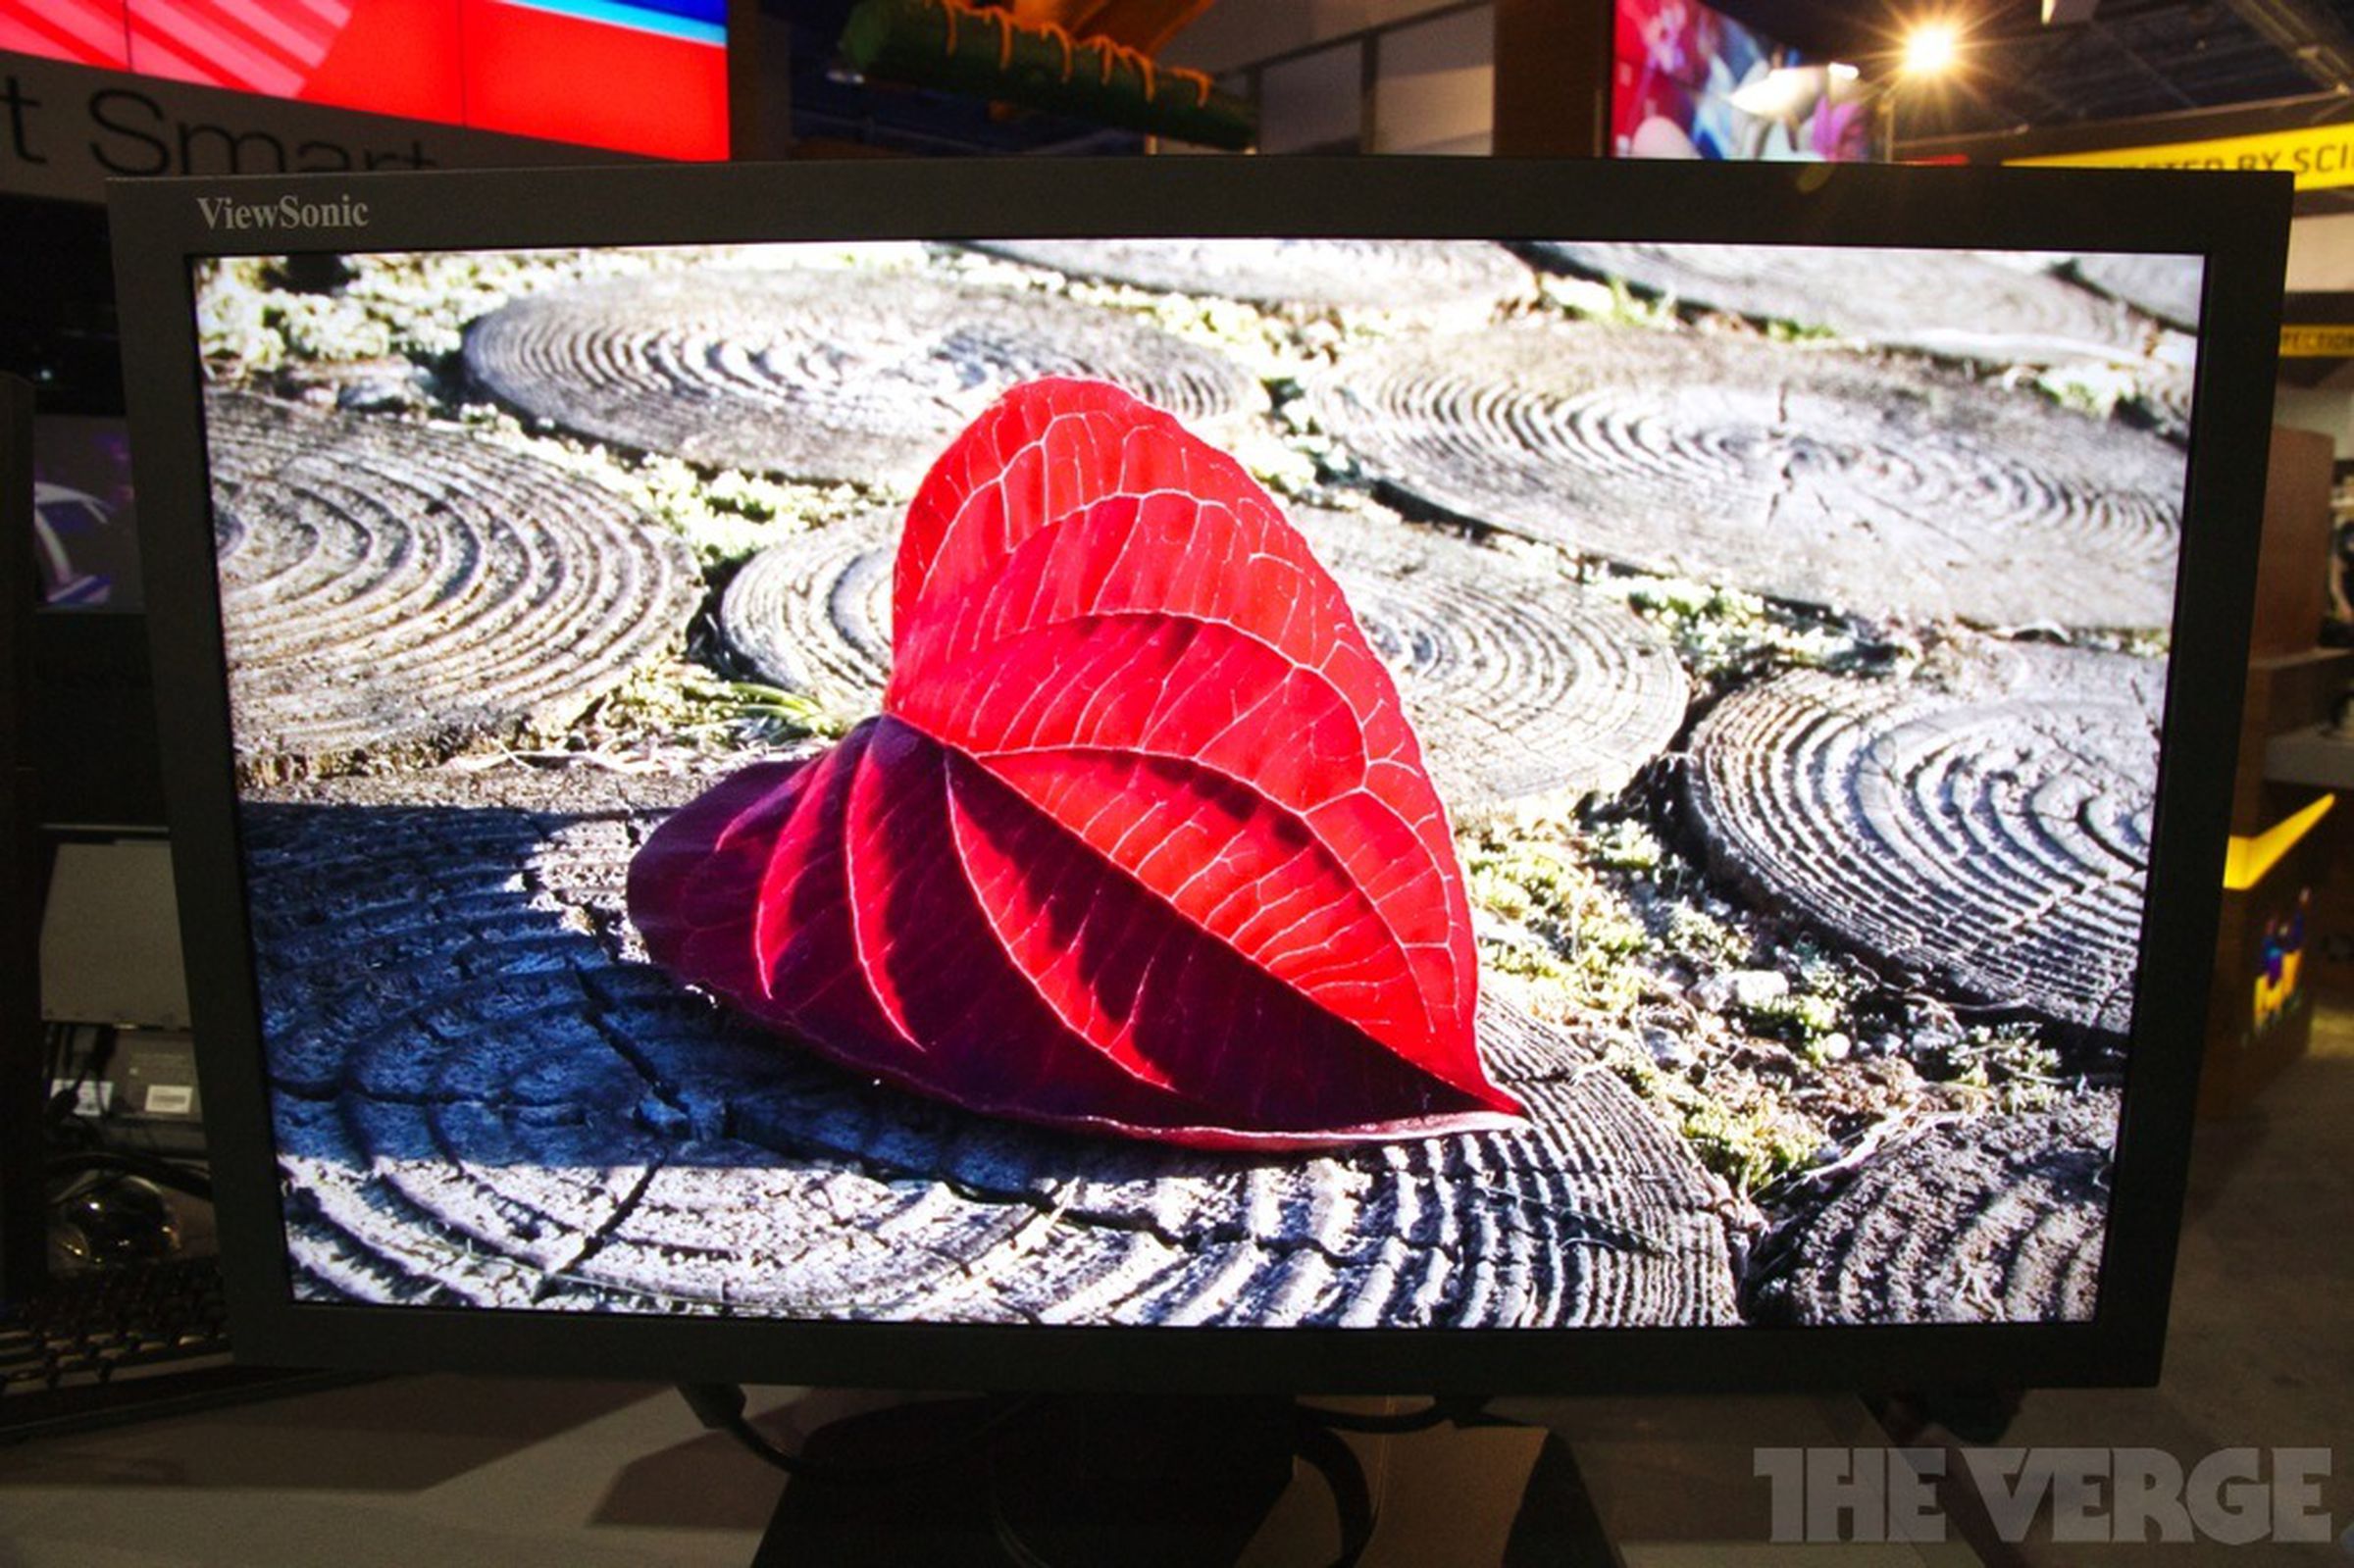 Viewsonic 24-inch Android display and 4K monitor prototype photos